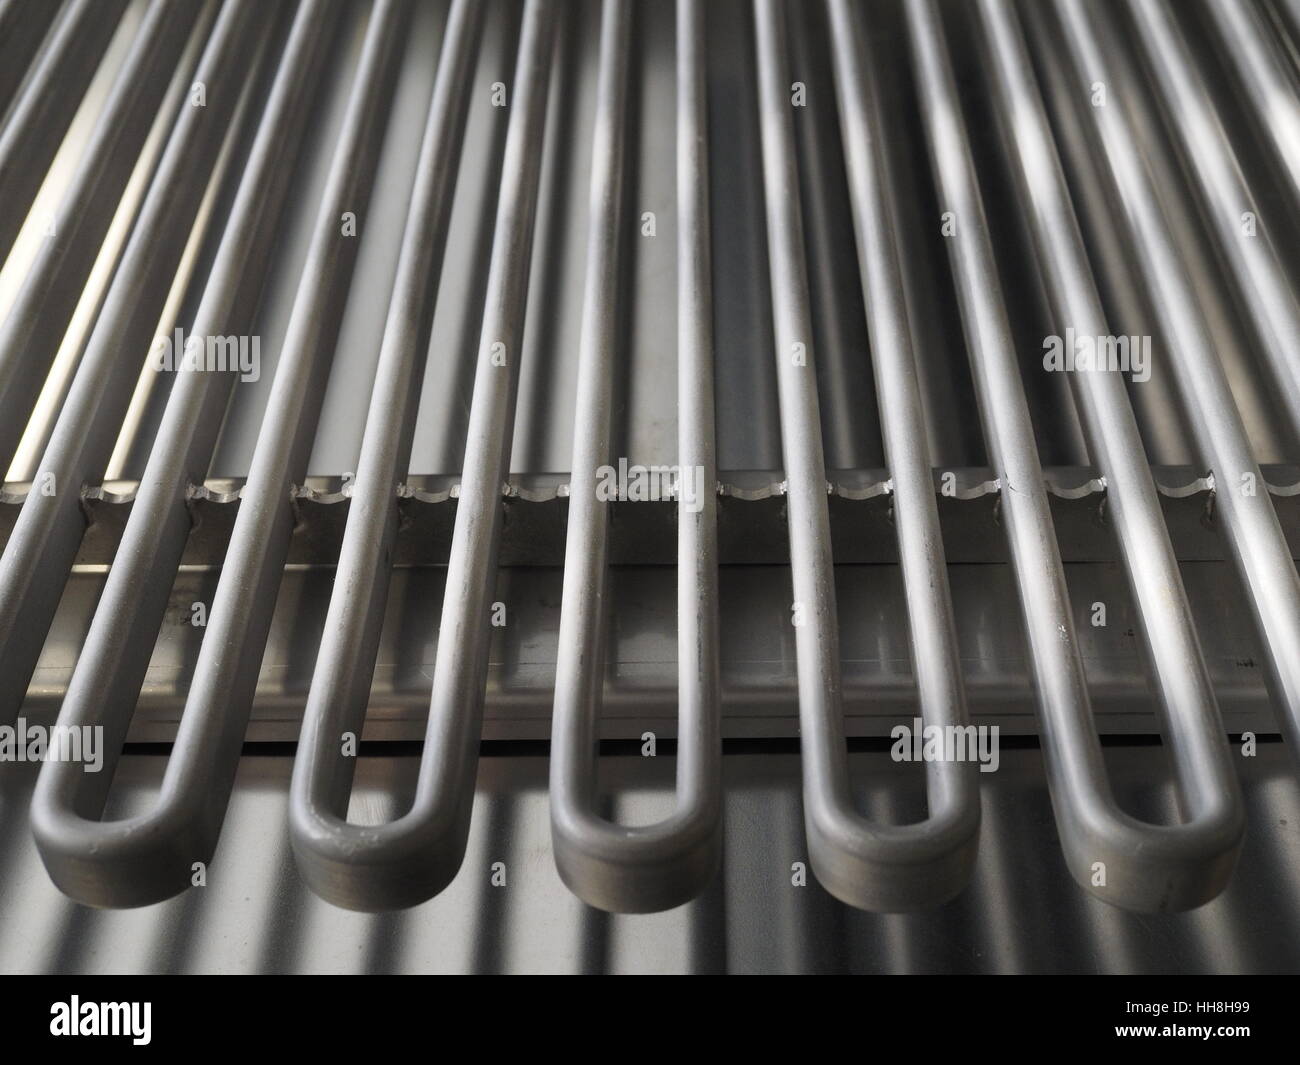 Industrial kitchen appliances for industrial kitchens; fryer detail, electric heater element Stock Photo